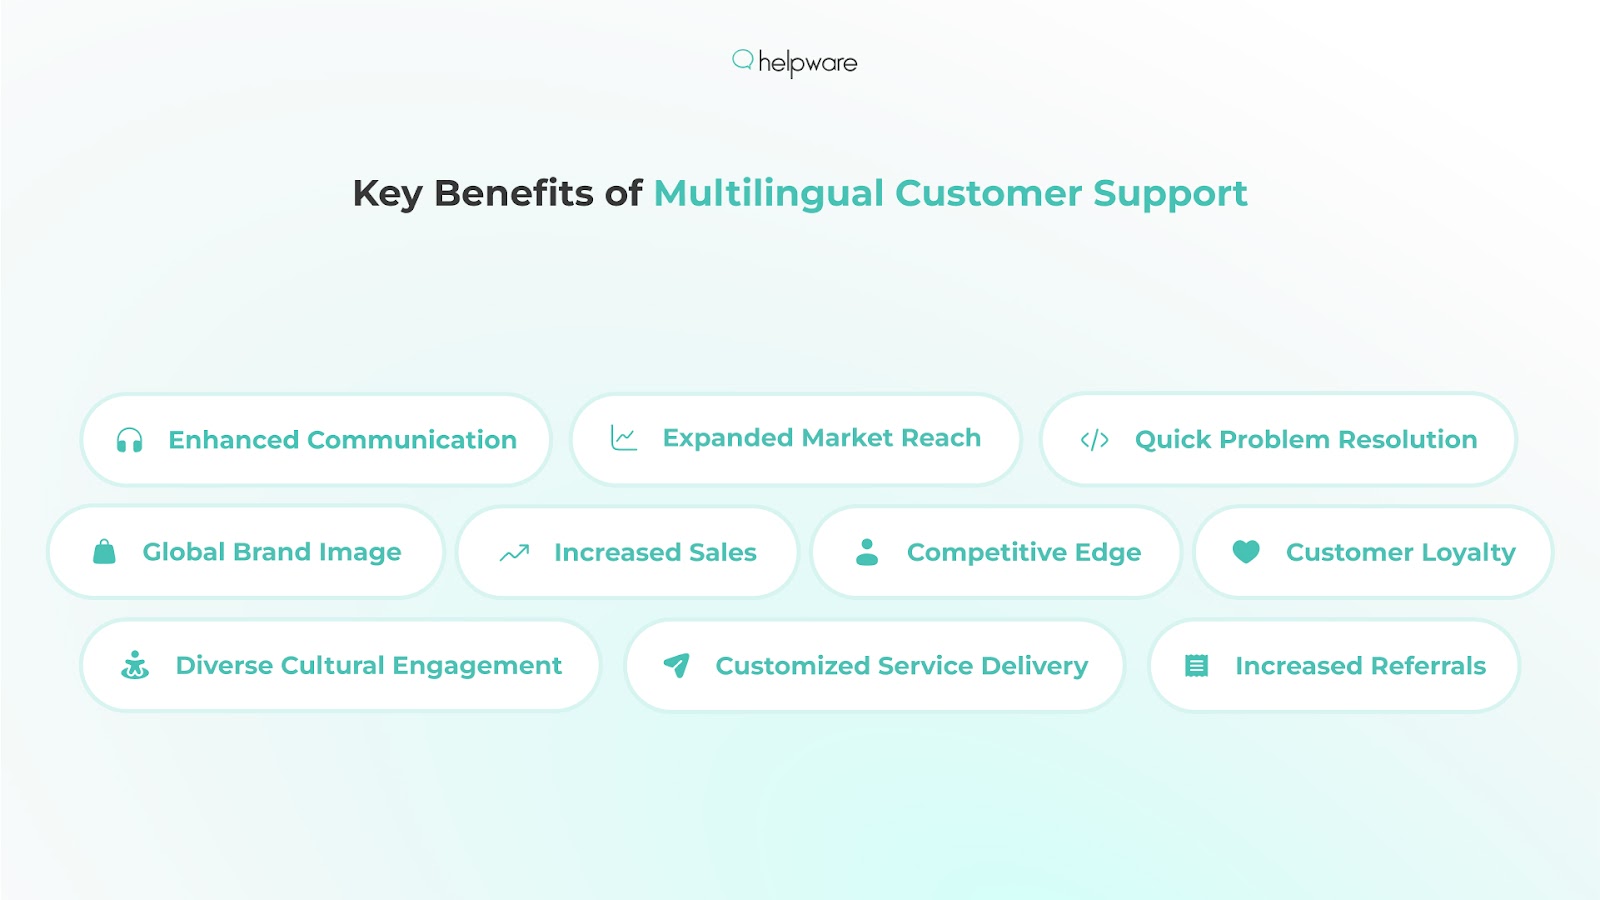 Key Benefits of Multilingual Customer Support